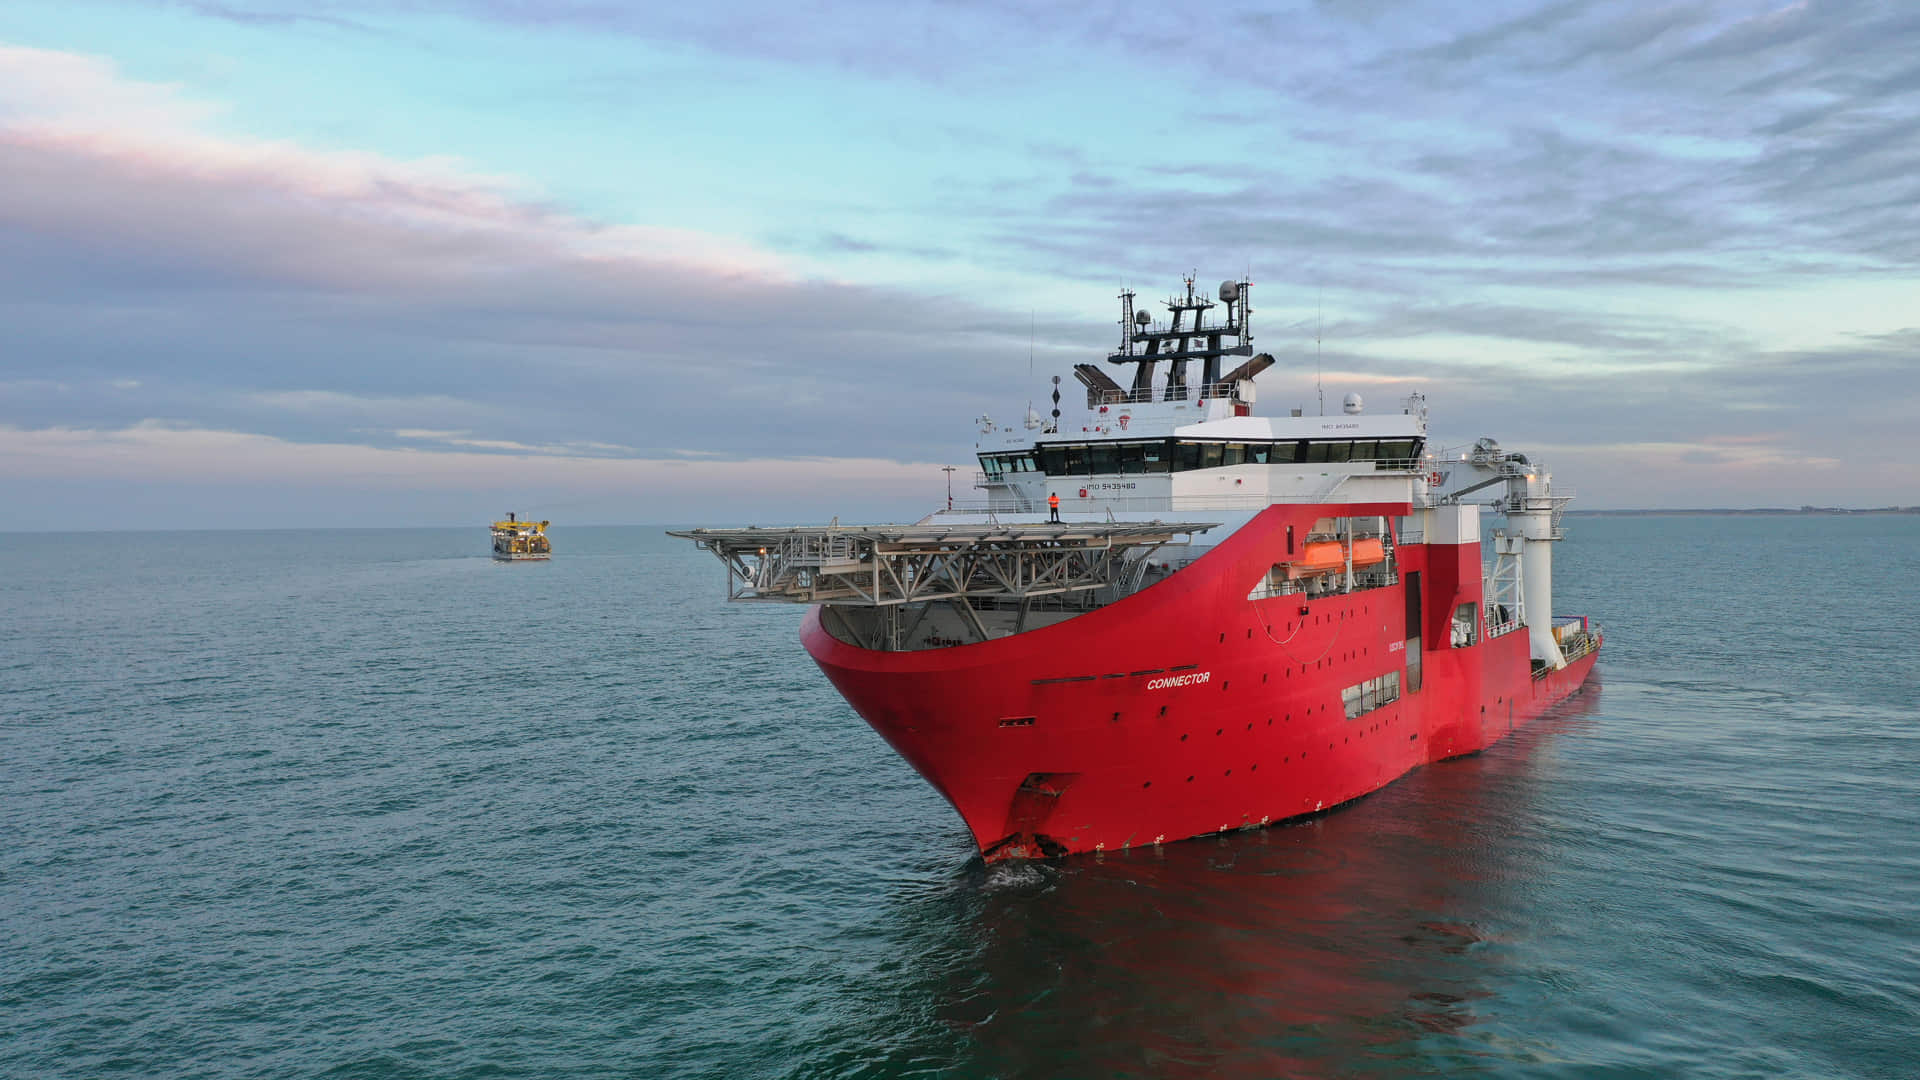 A photo of the cable laying vessel CLV Connector at sea